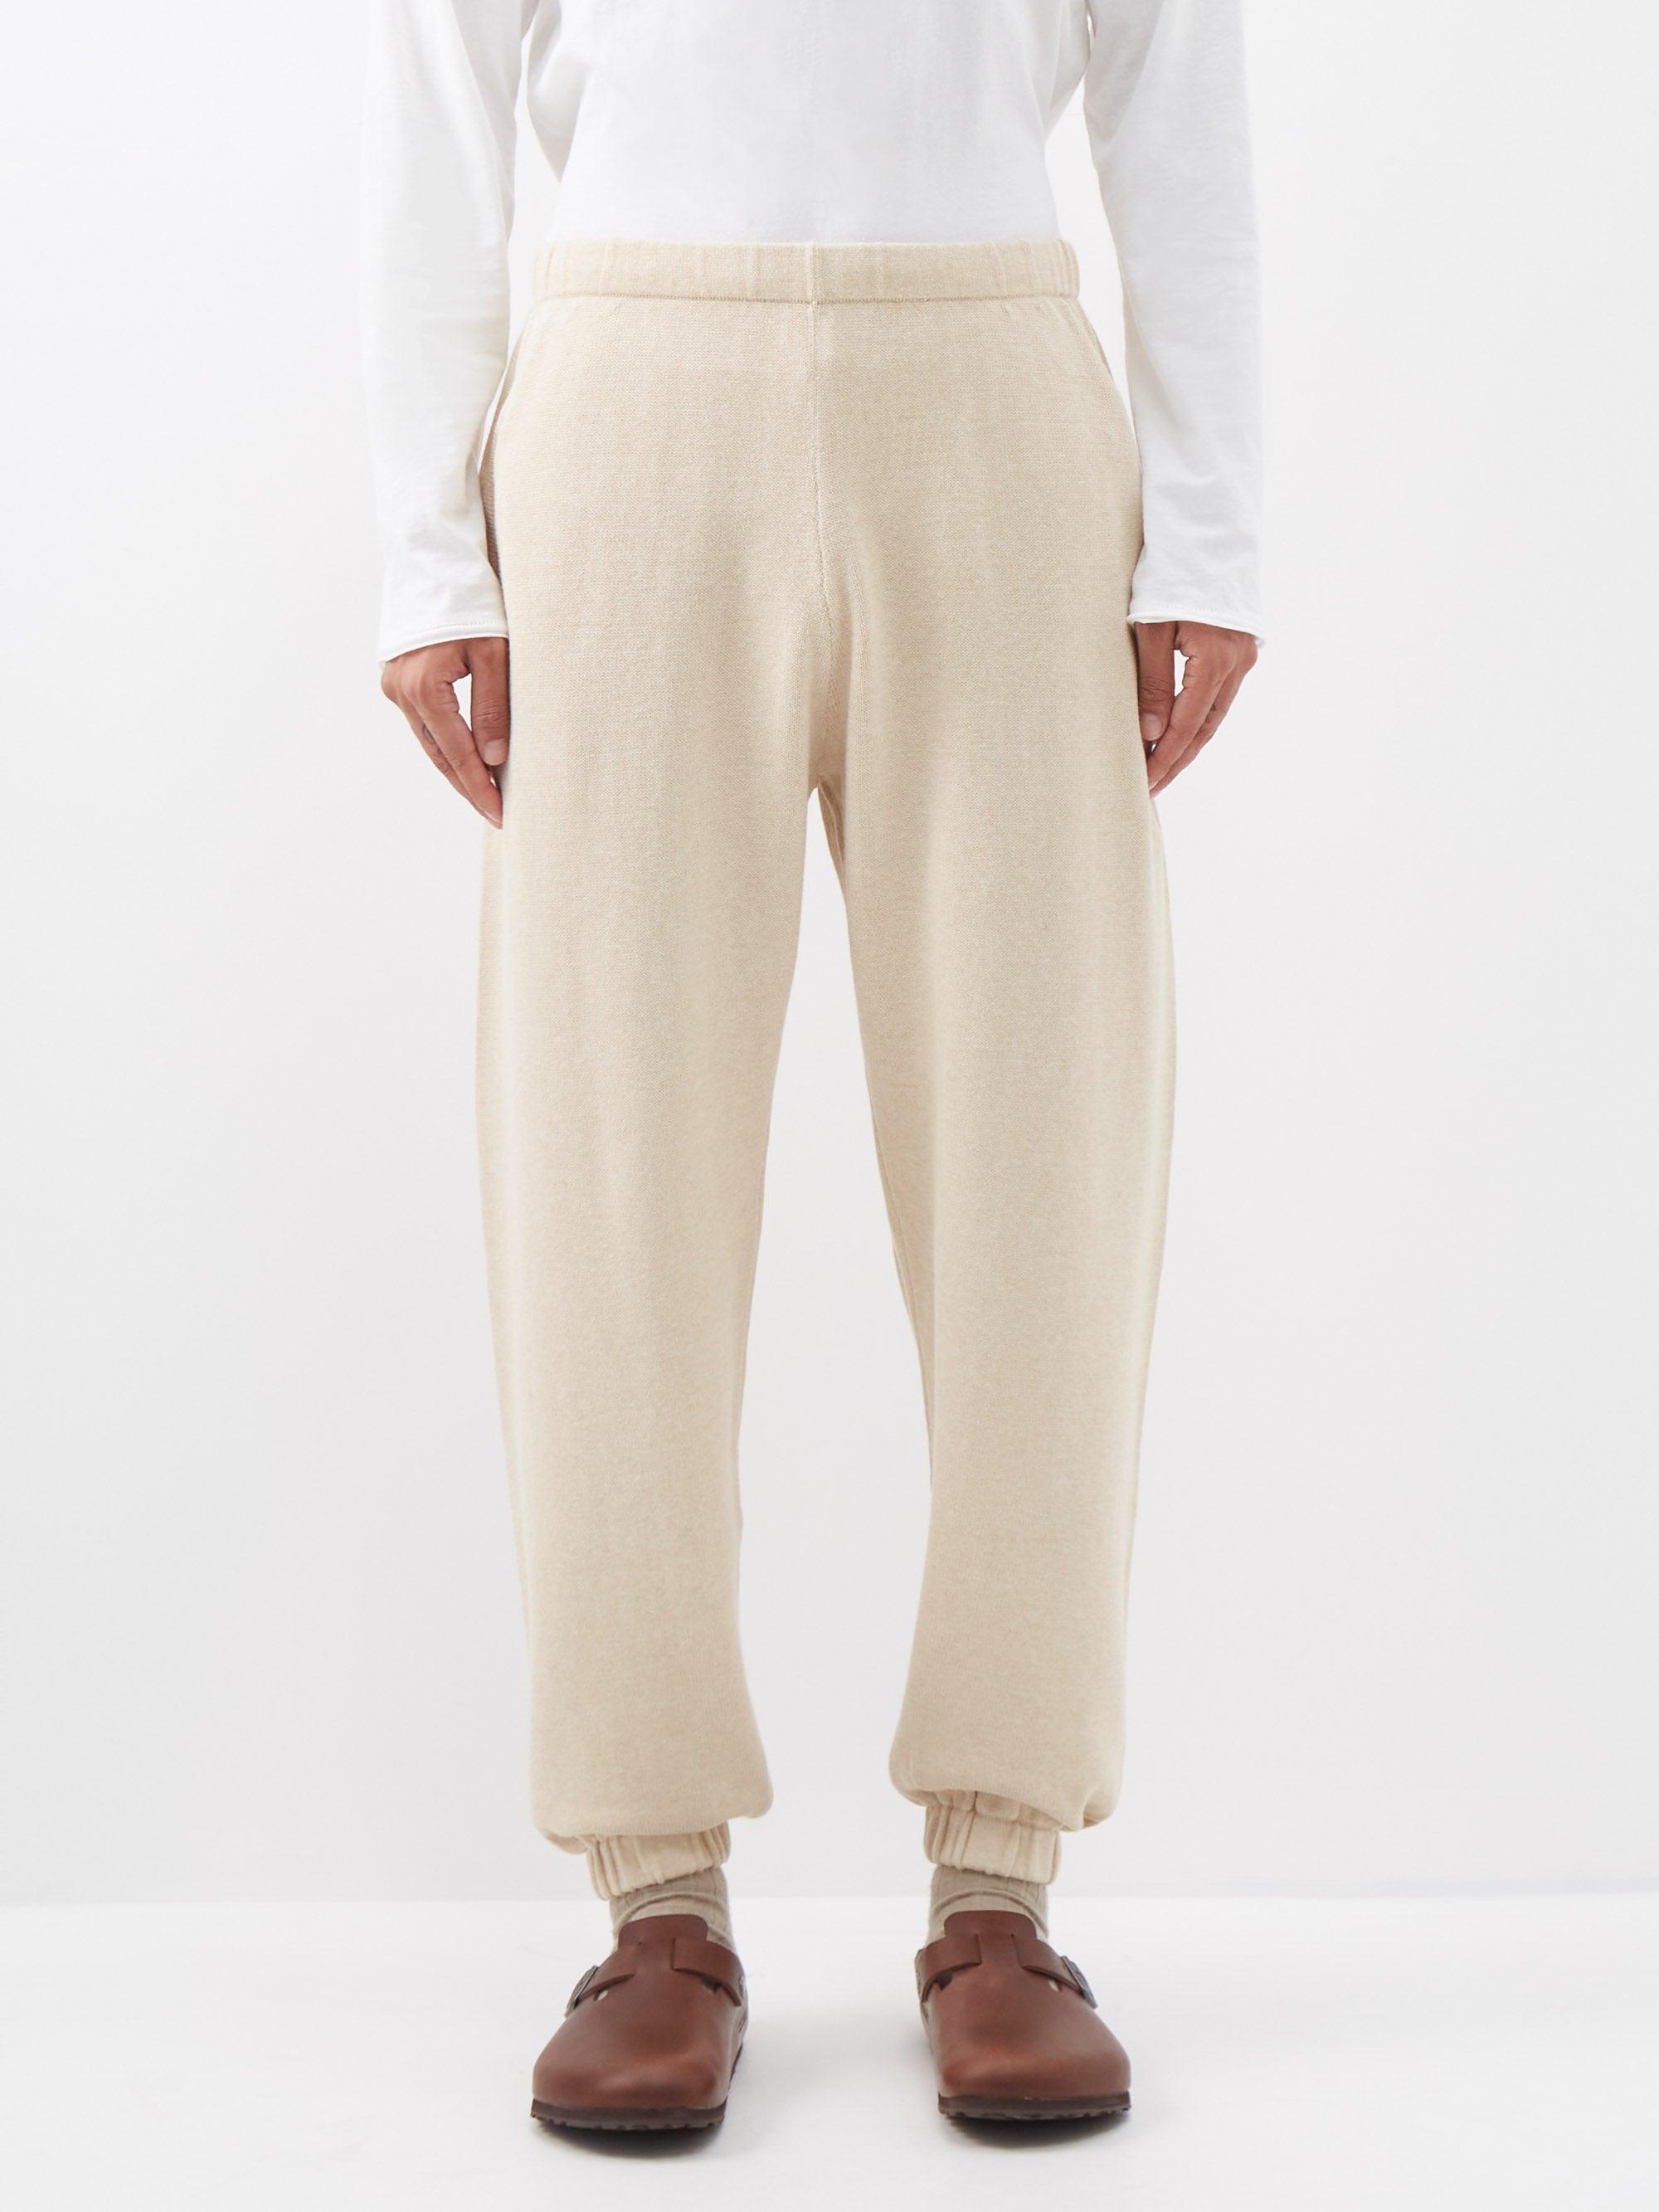 Ghiaia Cashmere Track Pants in Natural for Men | Lyst